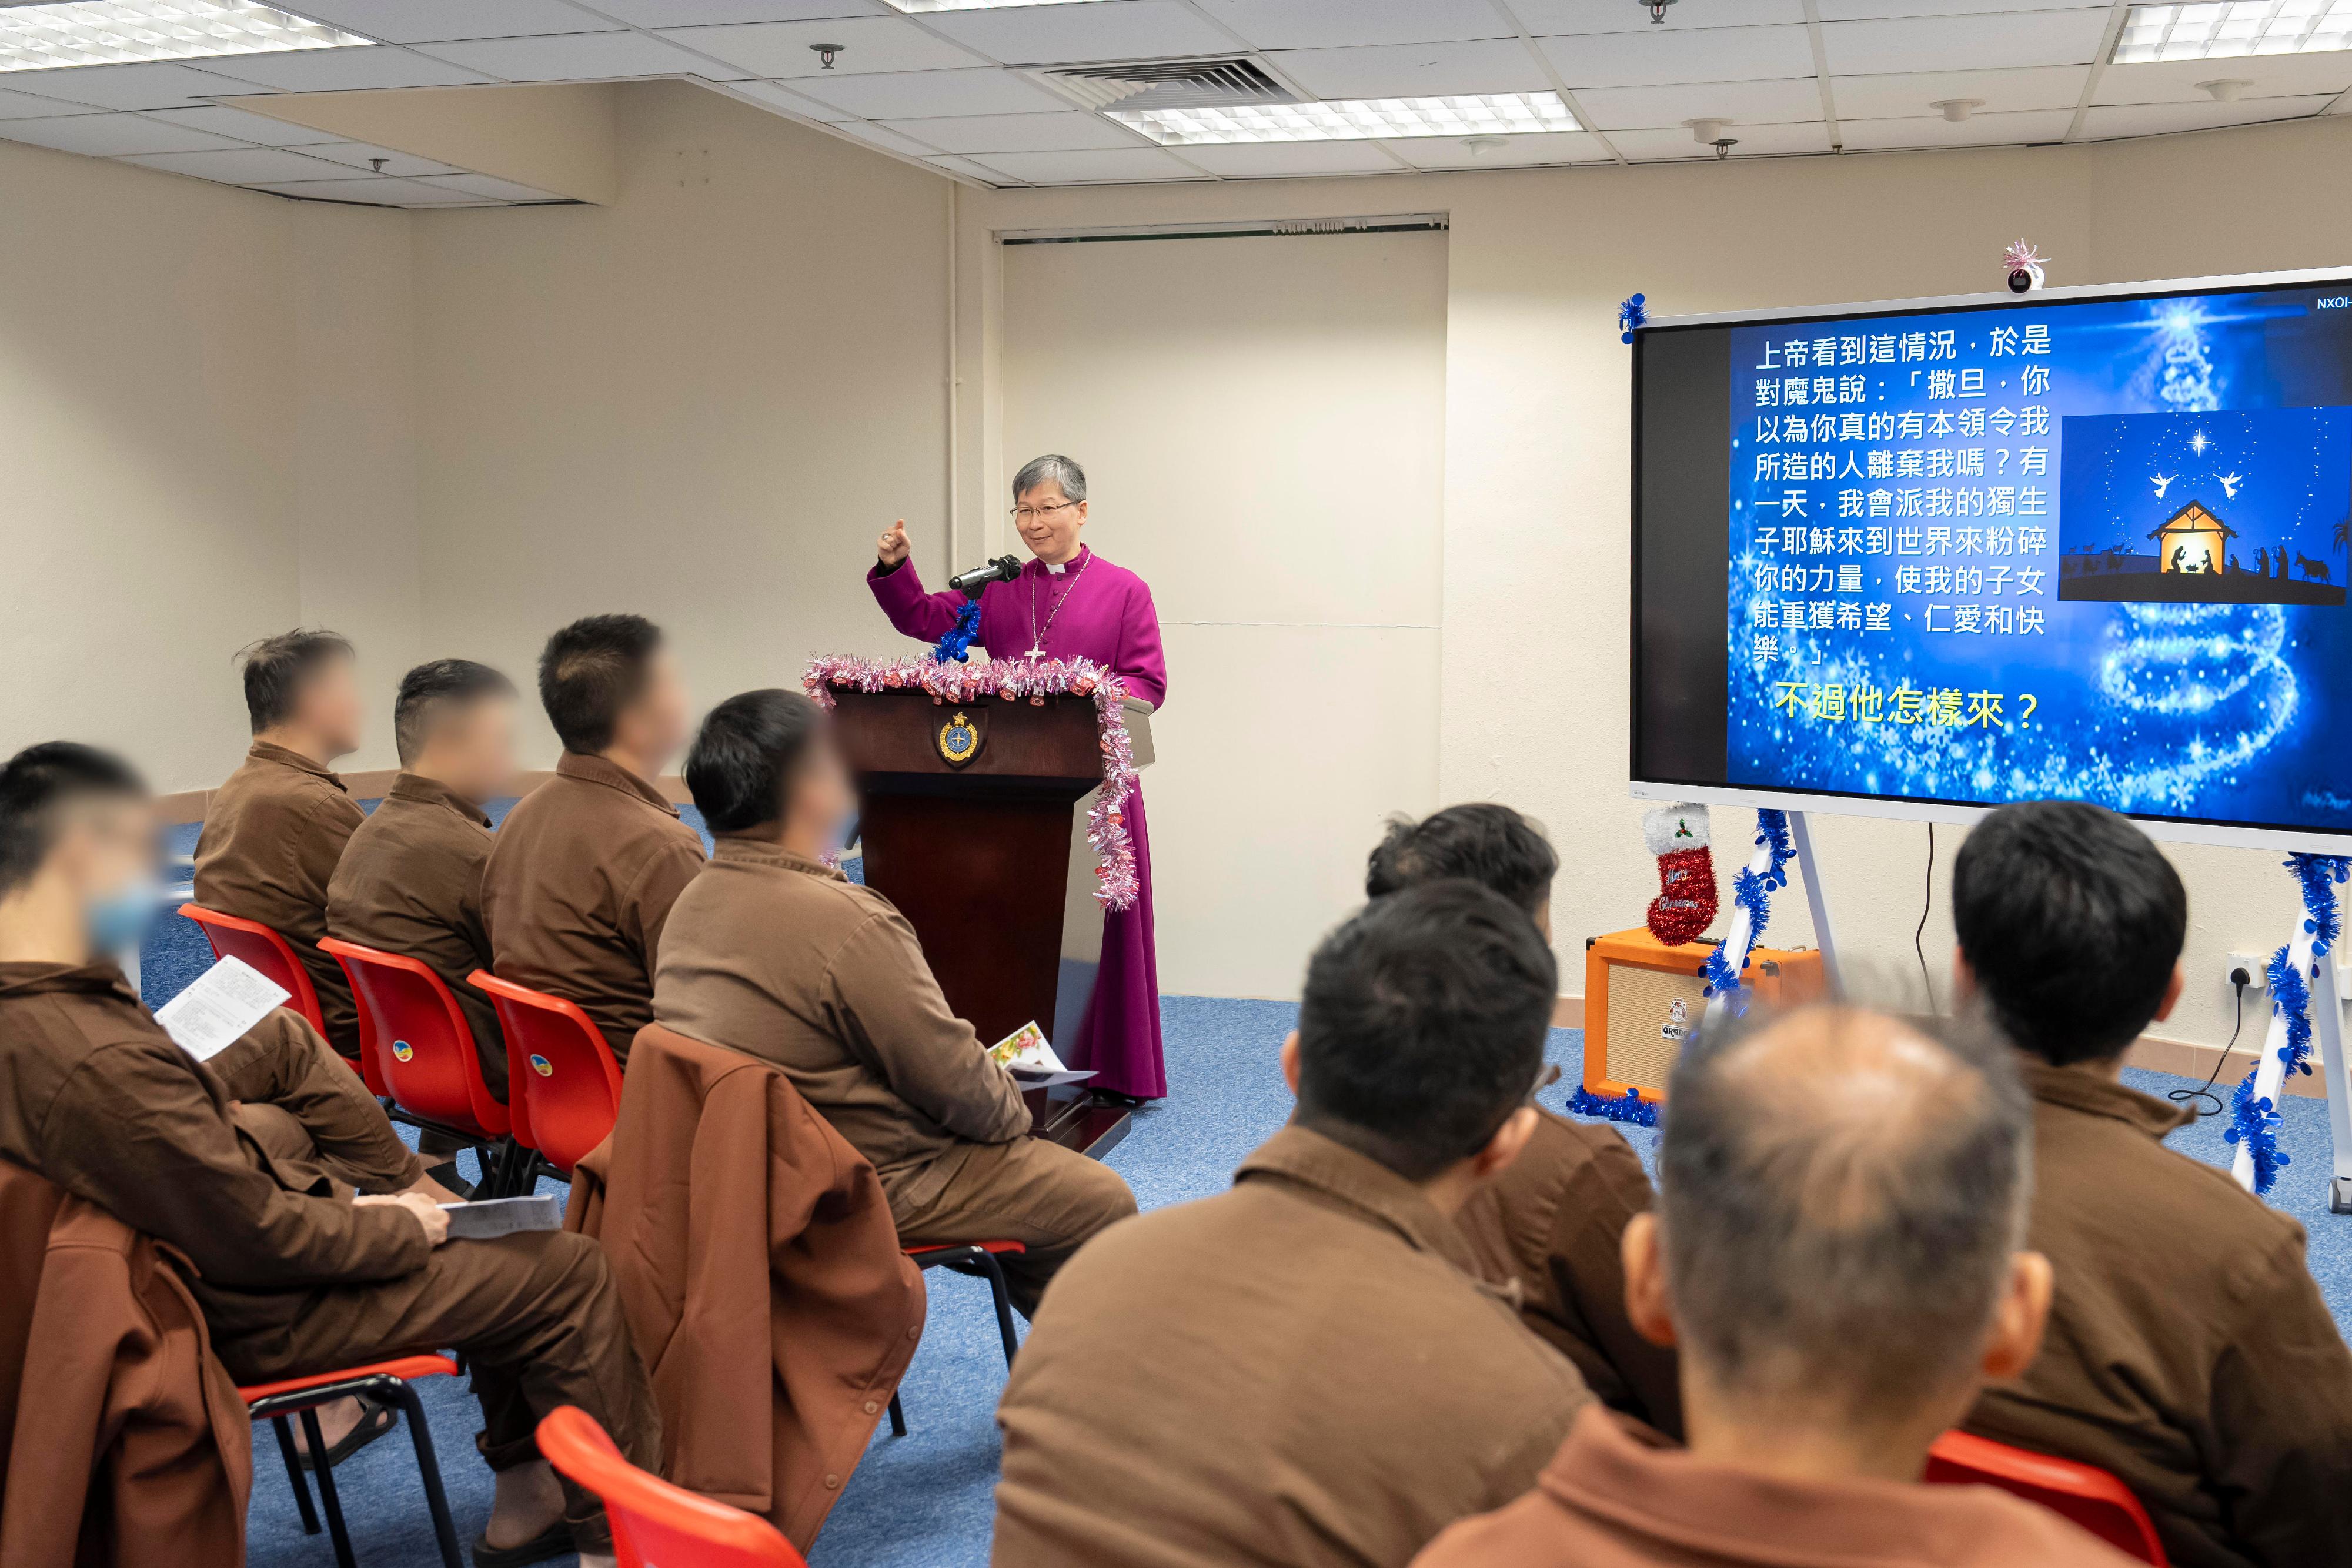 The Archbishop of Hong Kong, the Most Reverend Andrew Chan, visited Pak Sha Wan Correctional Institution and presided at a Christmas service on December 21.